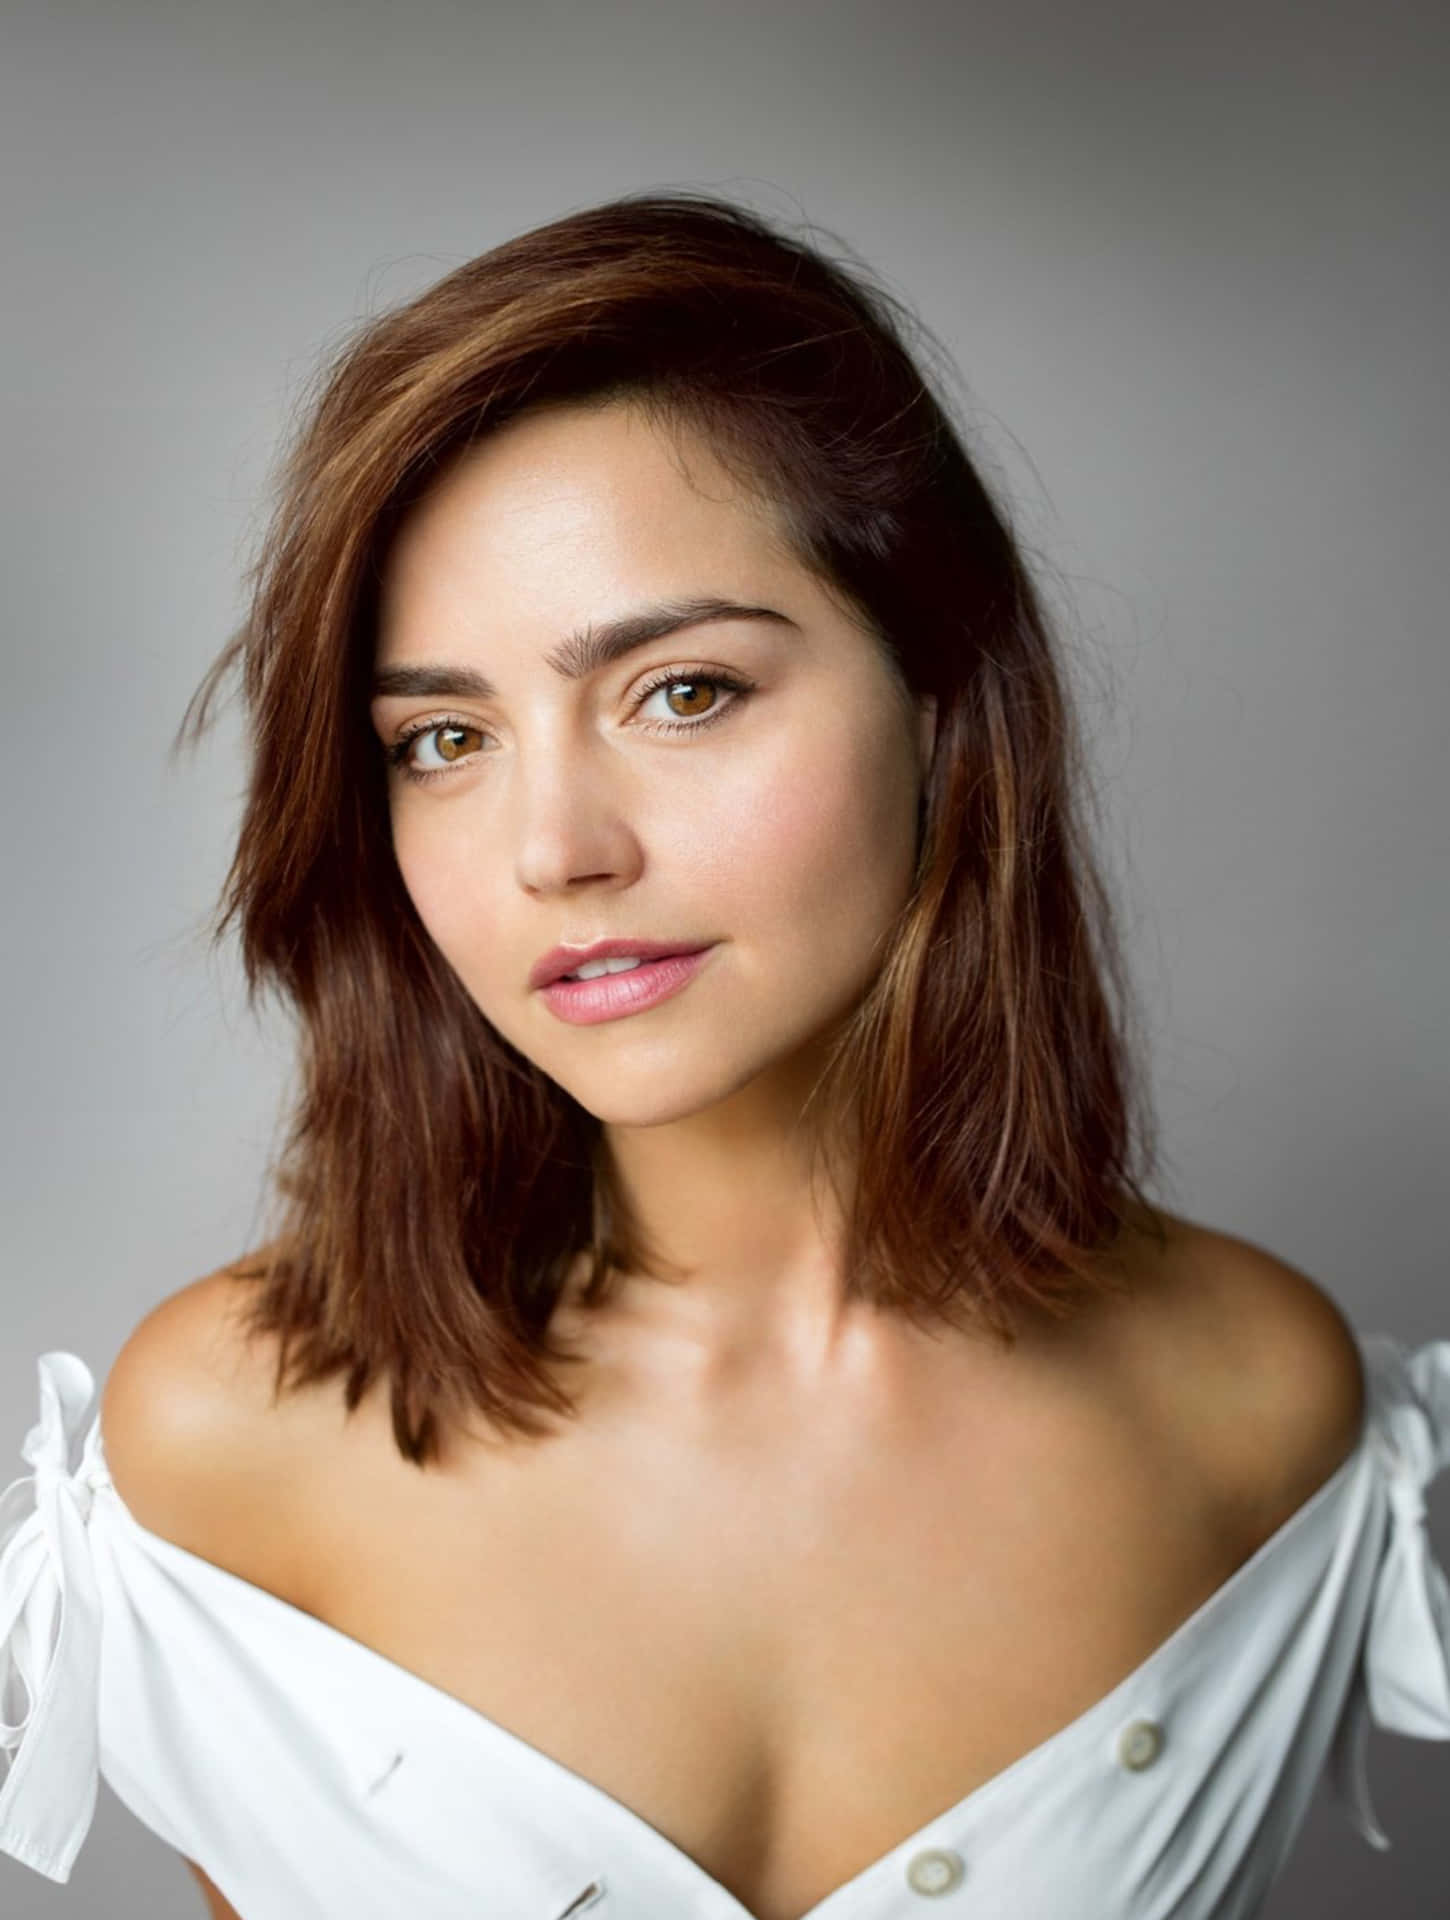 Jenna Coleman poses elegantly against a simple backdrop Wallpaper